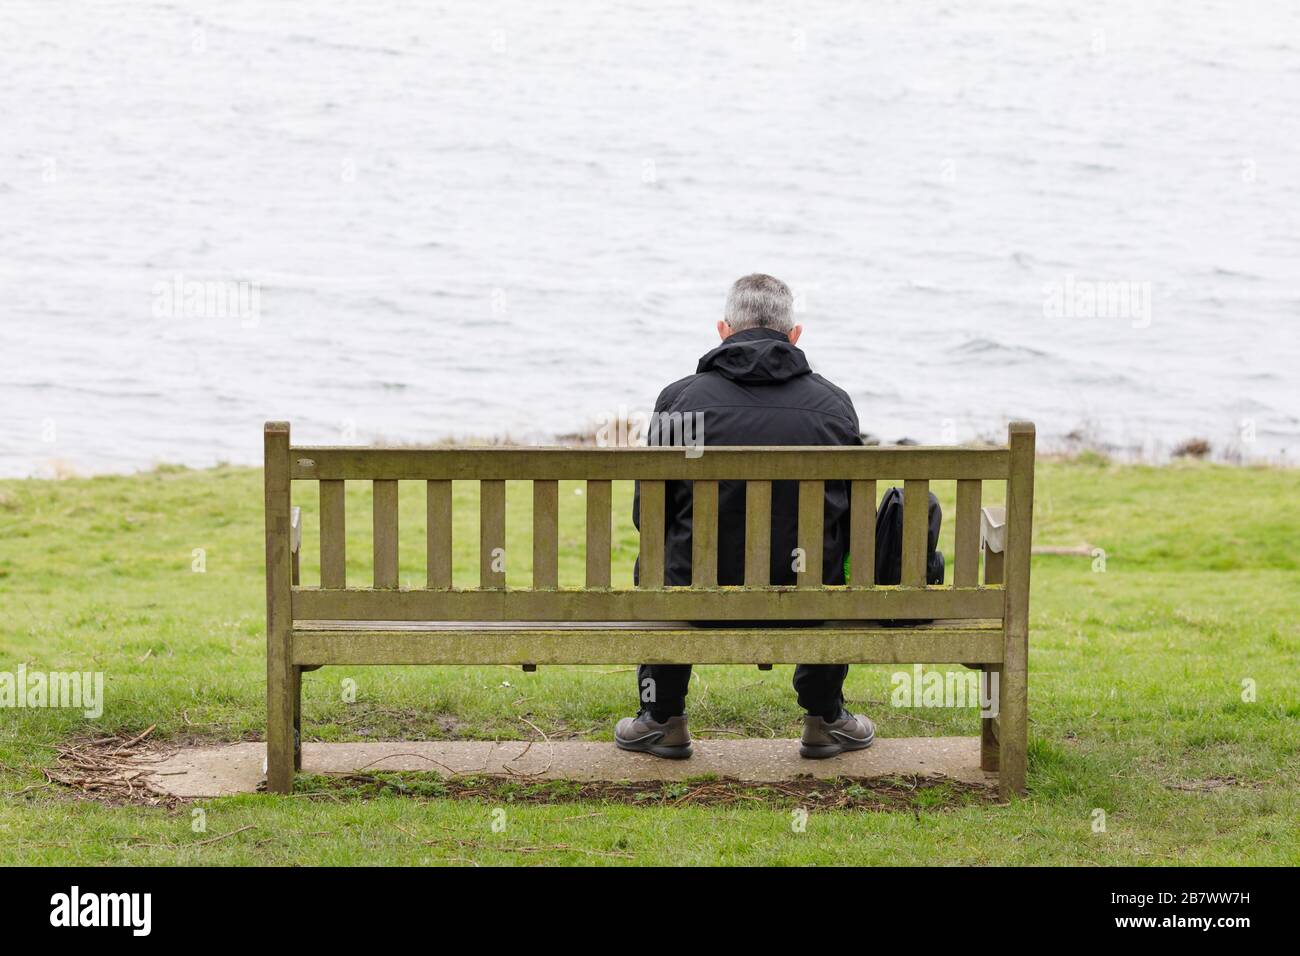 Draycote, Rugby, Warwickshire, March 2020: A man in a waterproof jacket, with his back to us, sits on a wooden bench facing empty water. Stock Photo